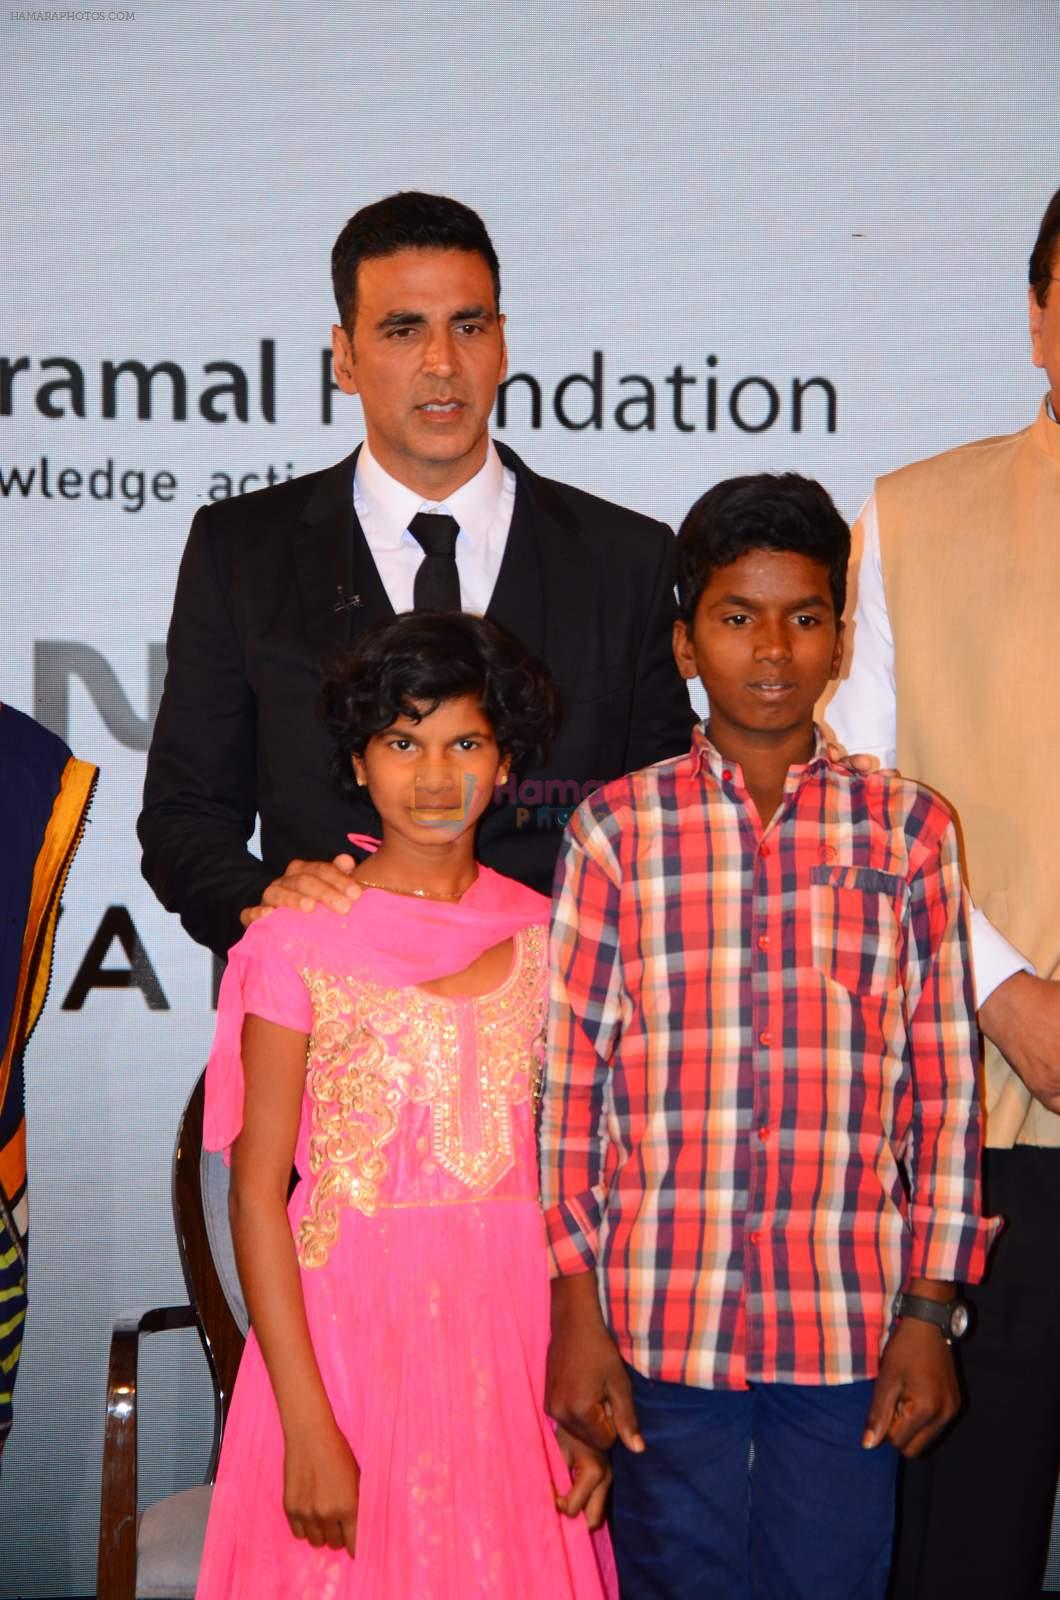 Akshay Kumar at NDTV Initiative for farmers suffering on 15th Dec 2015